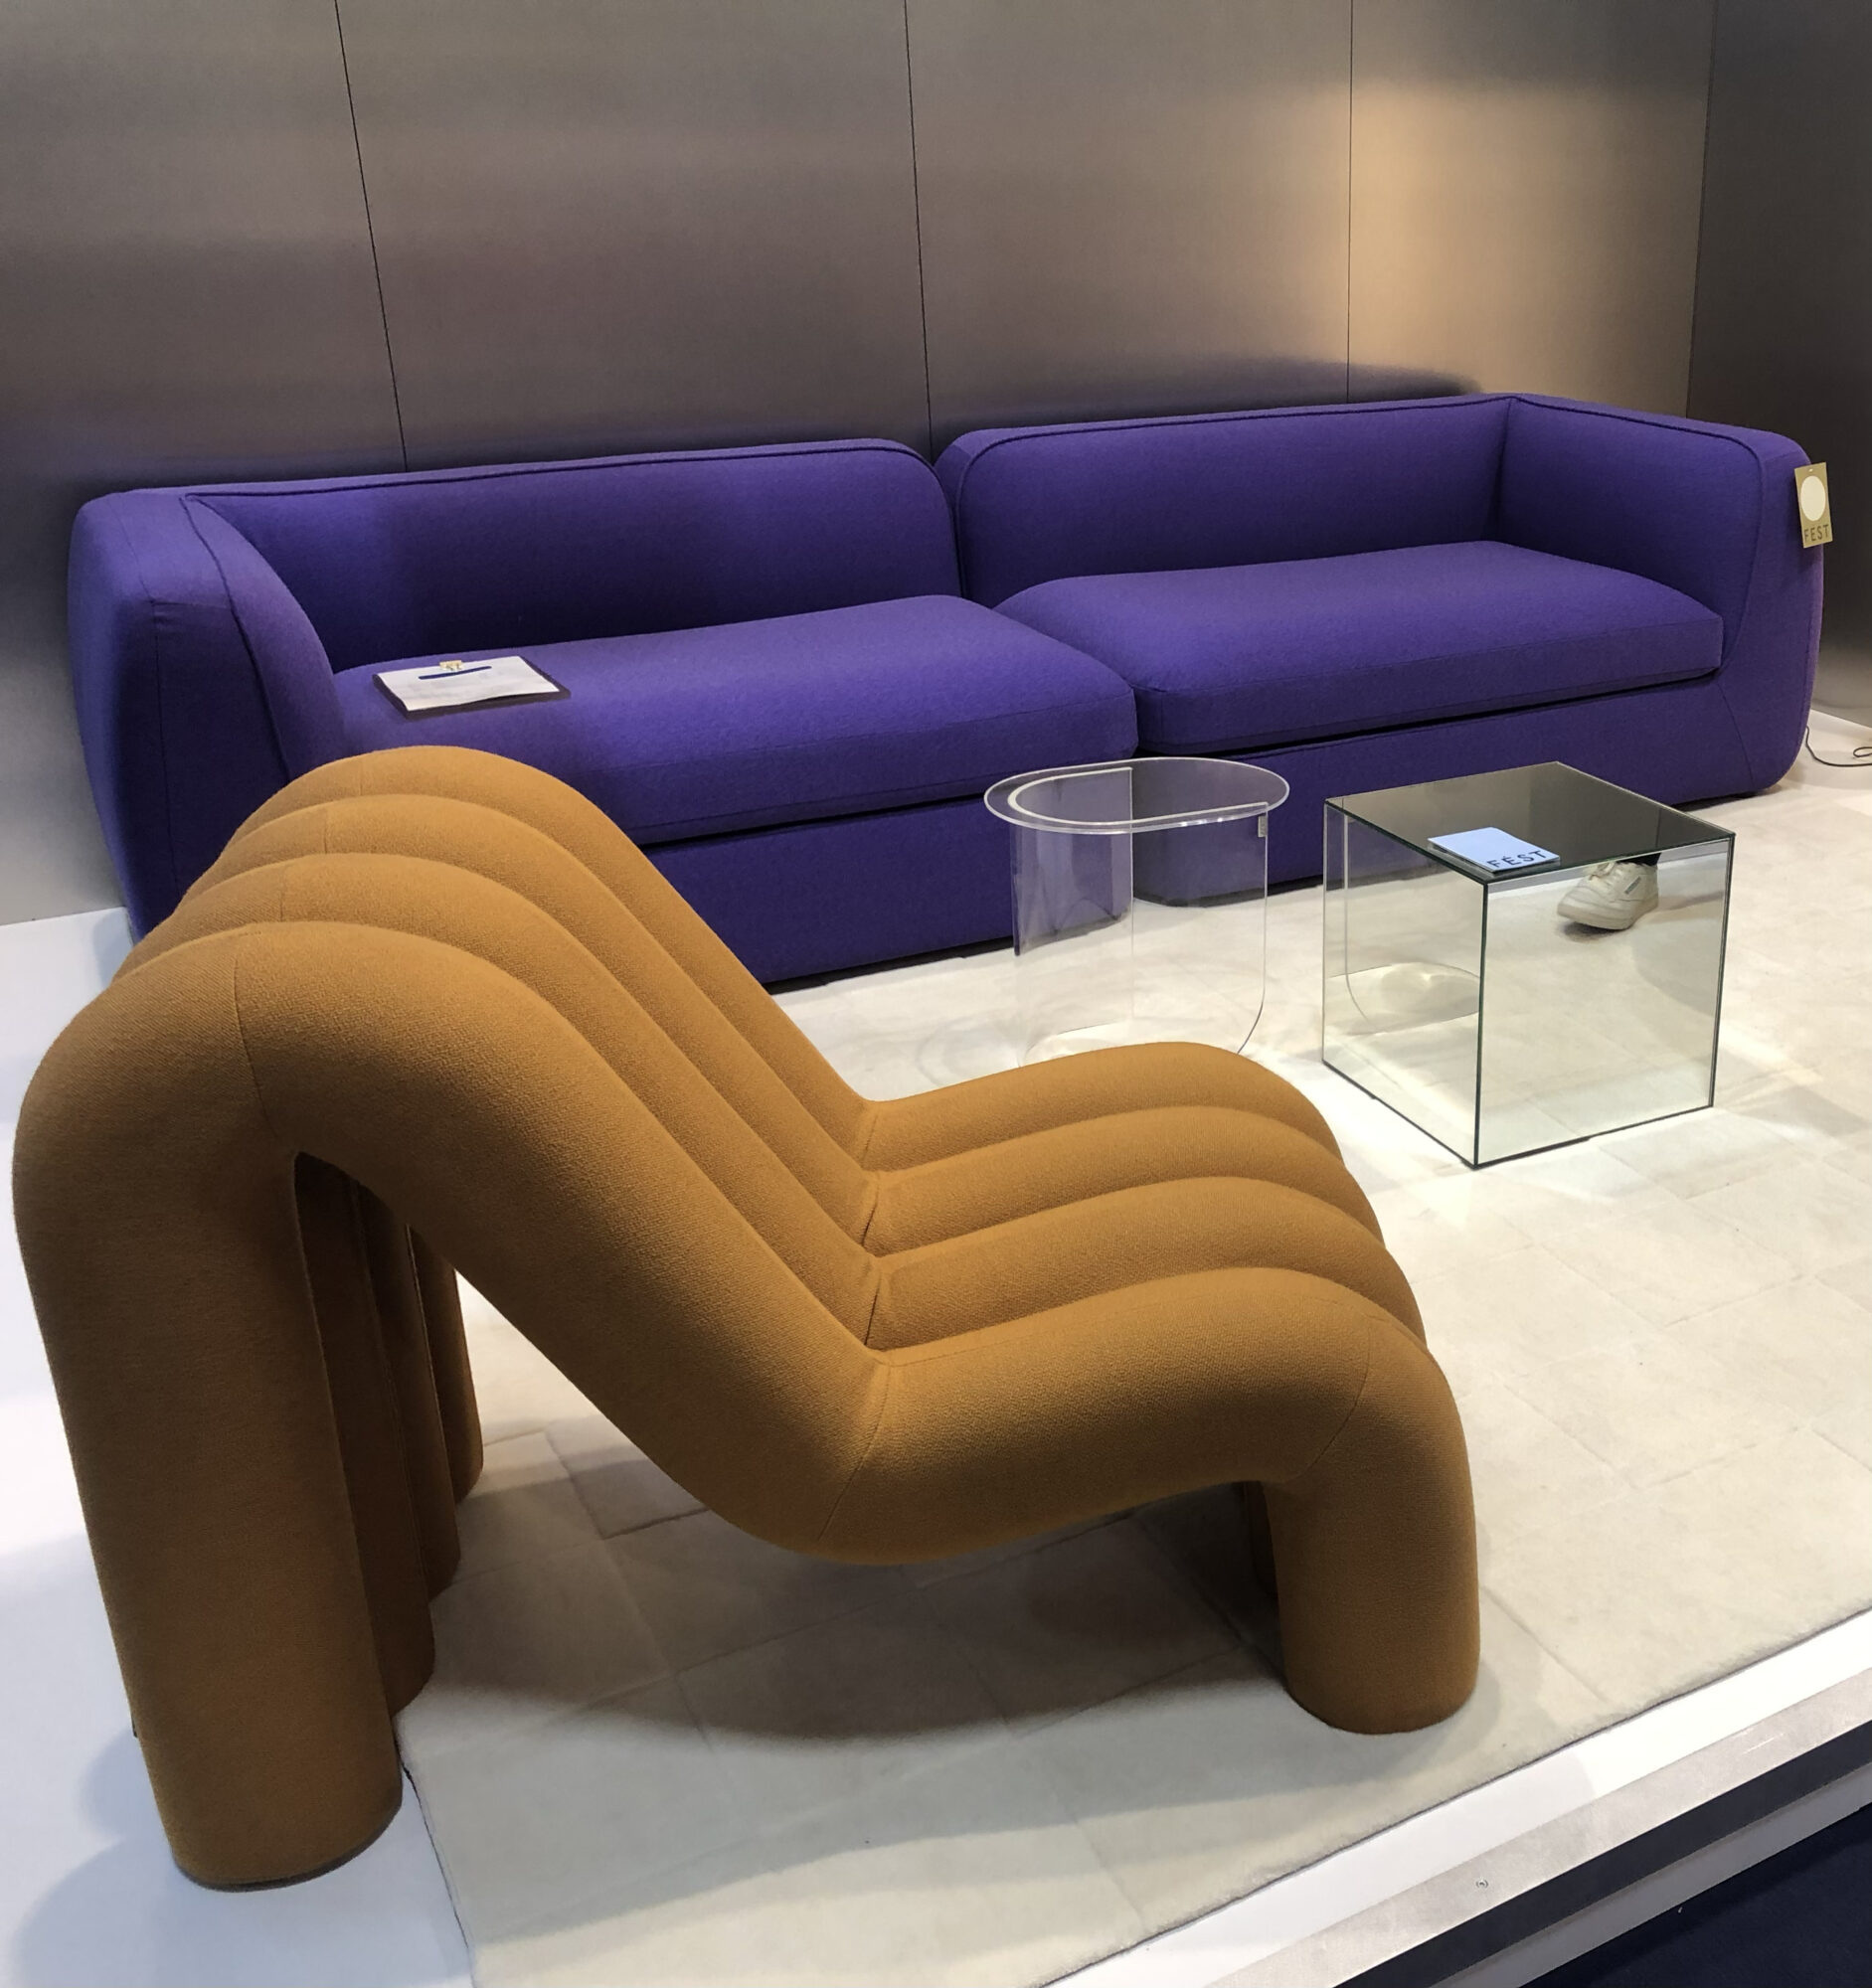 dark purple couch and curved orange chair